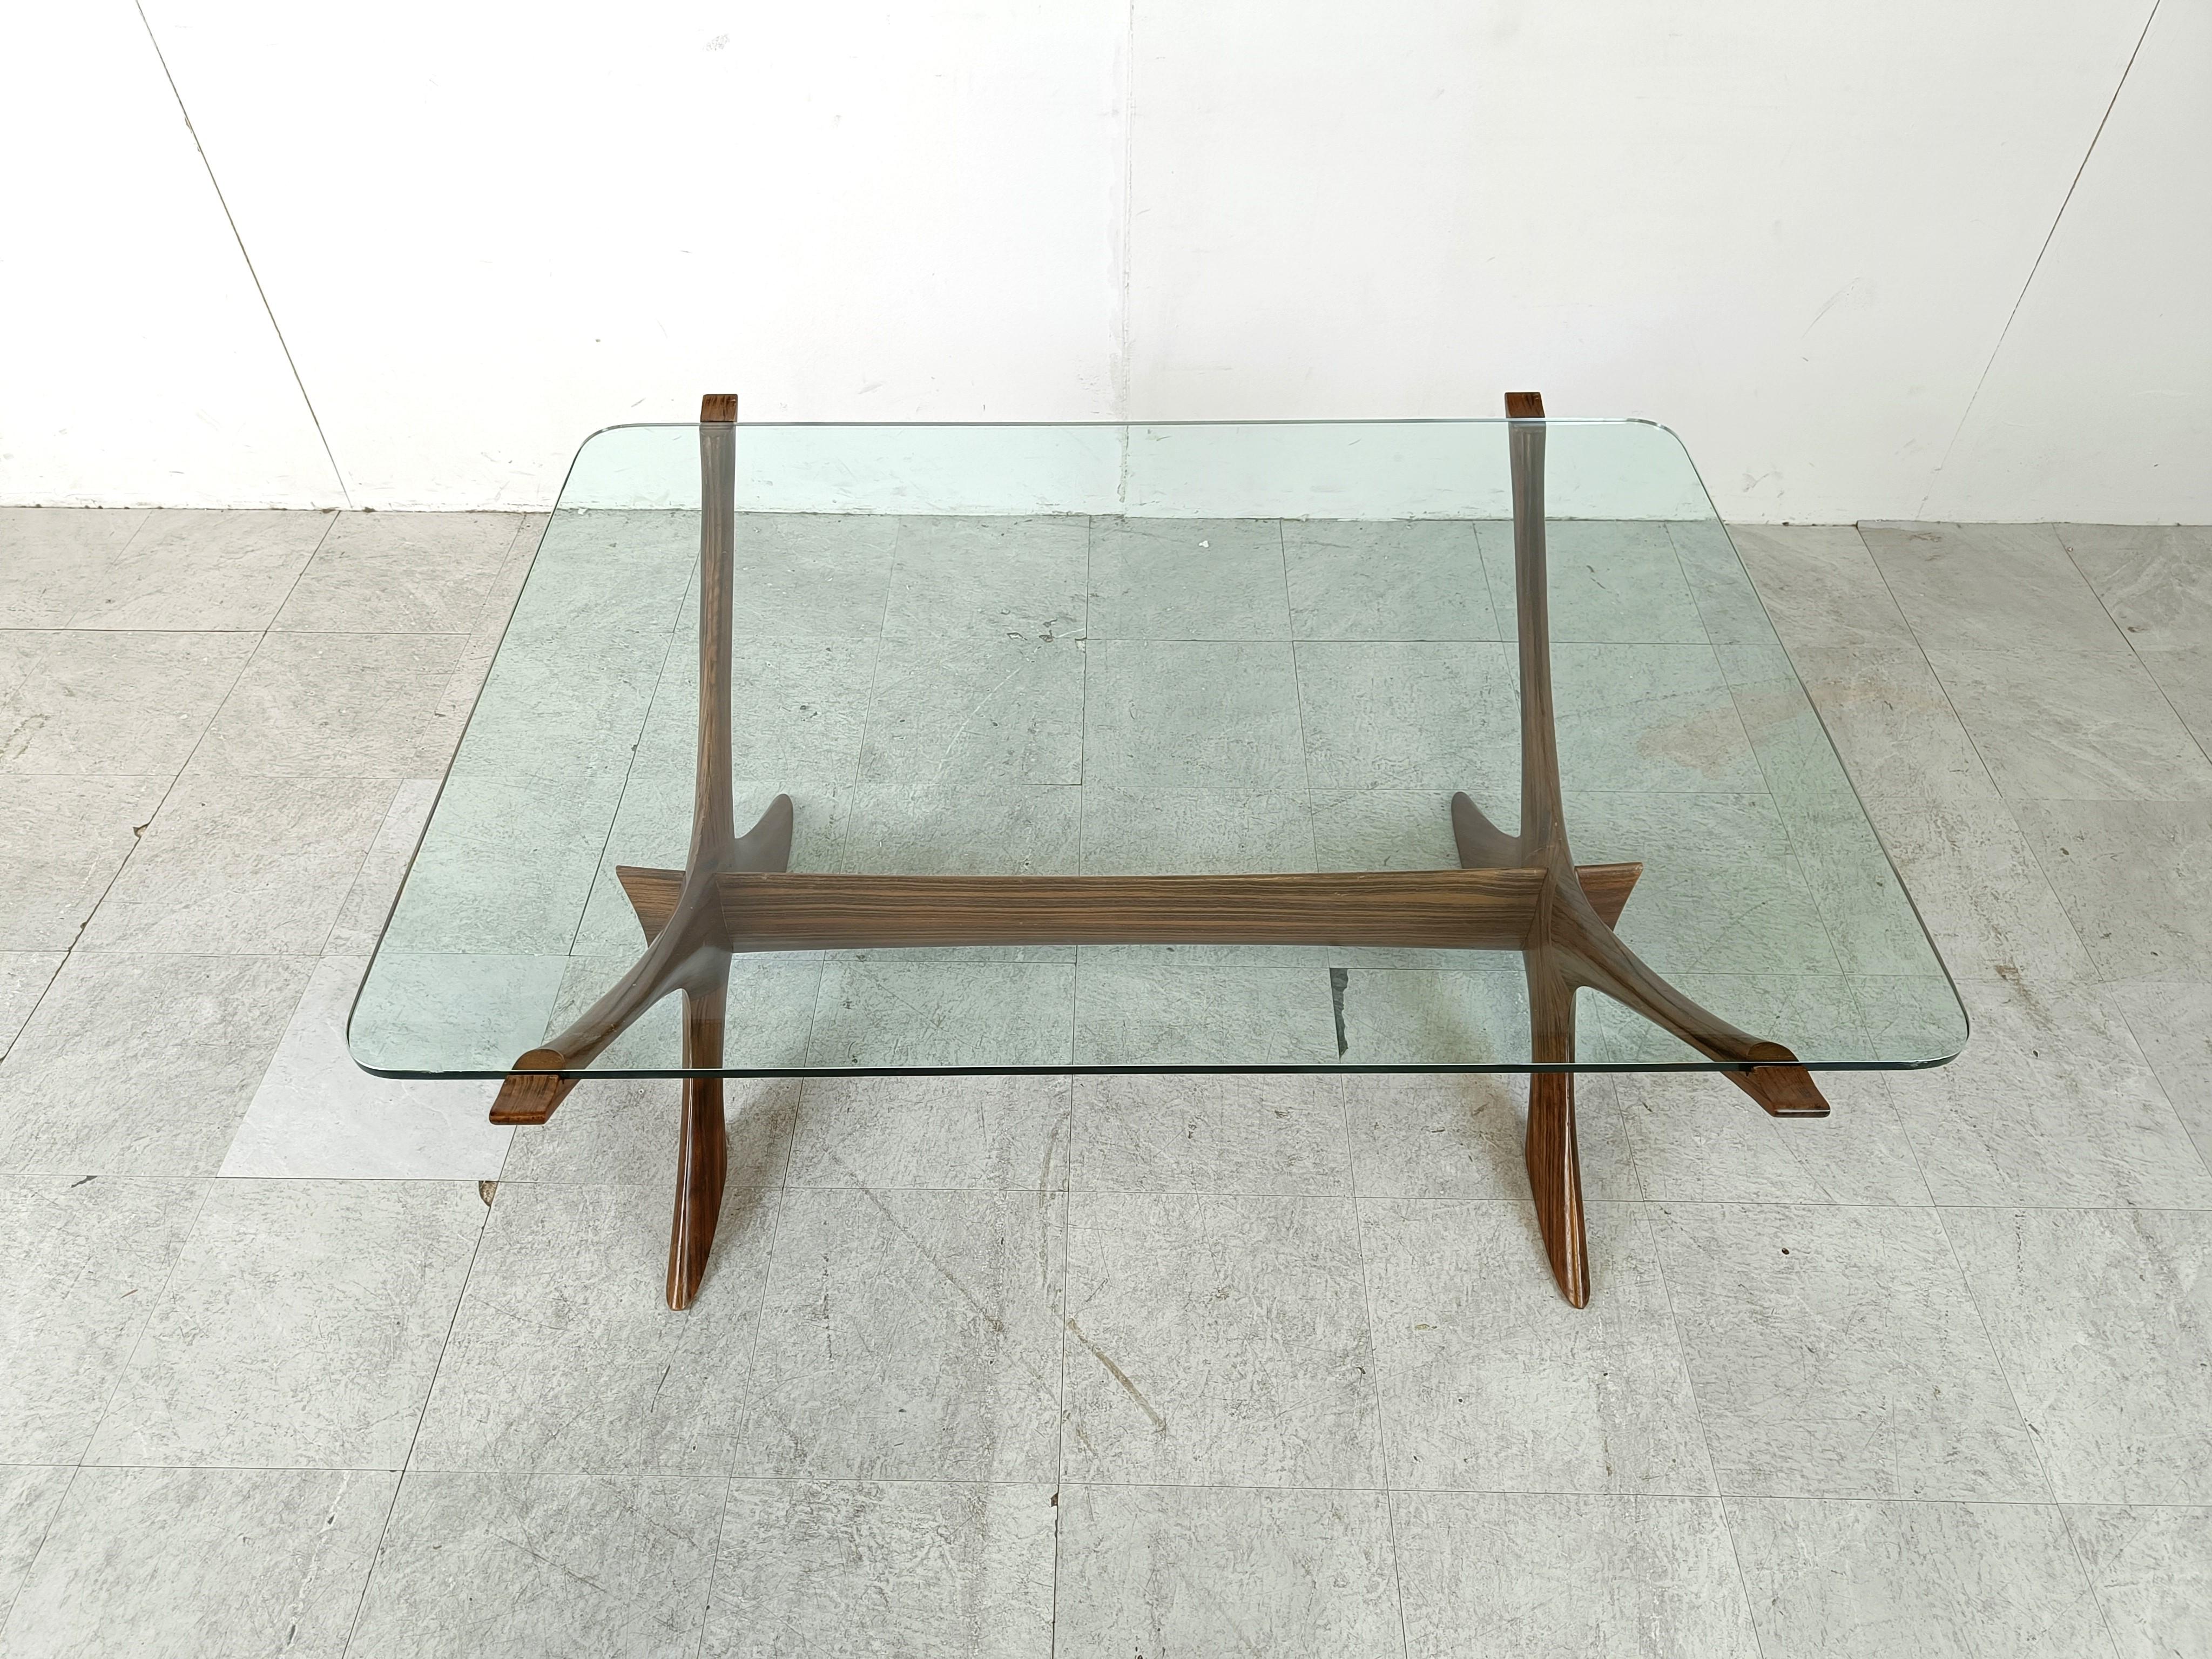 Condor Coffee Table by Fredrik Schriever-Abeln, Sweden, 1960s For Sale 3